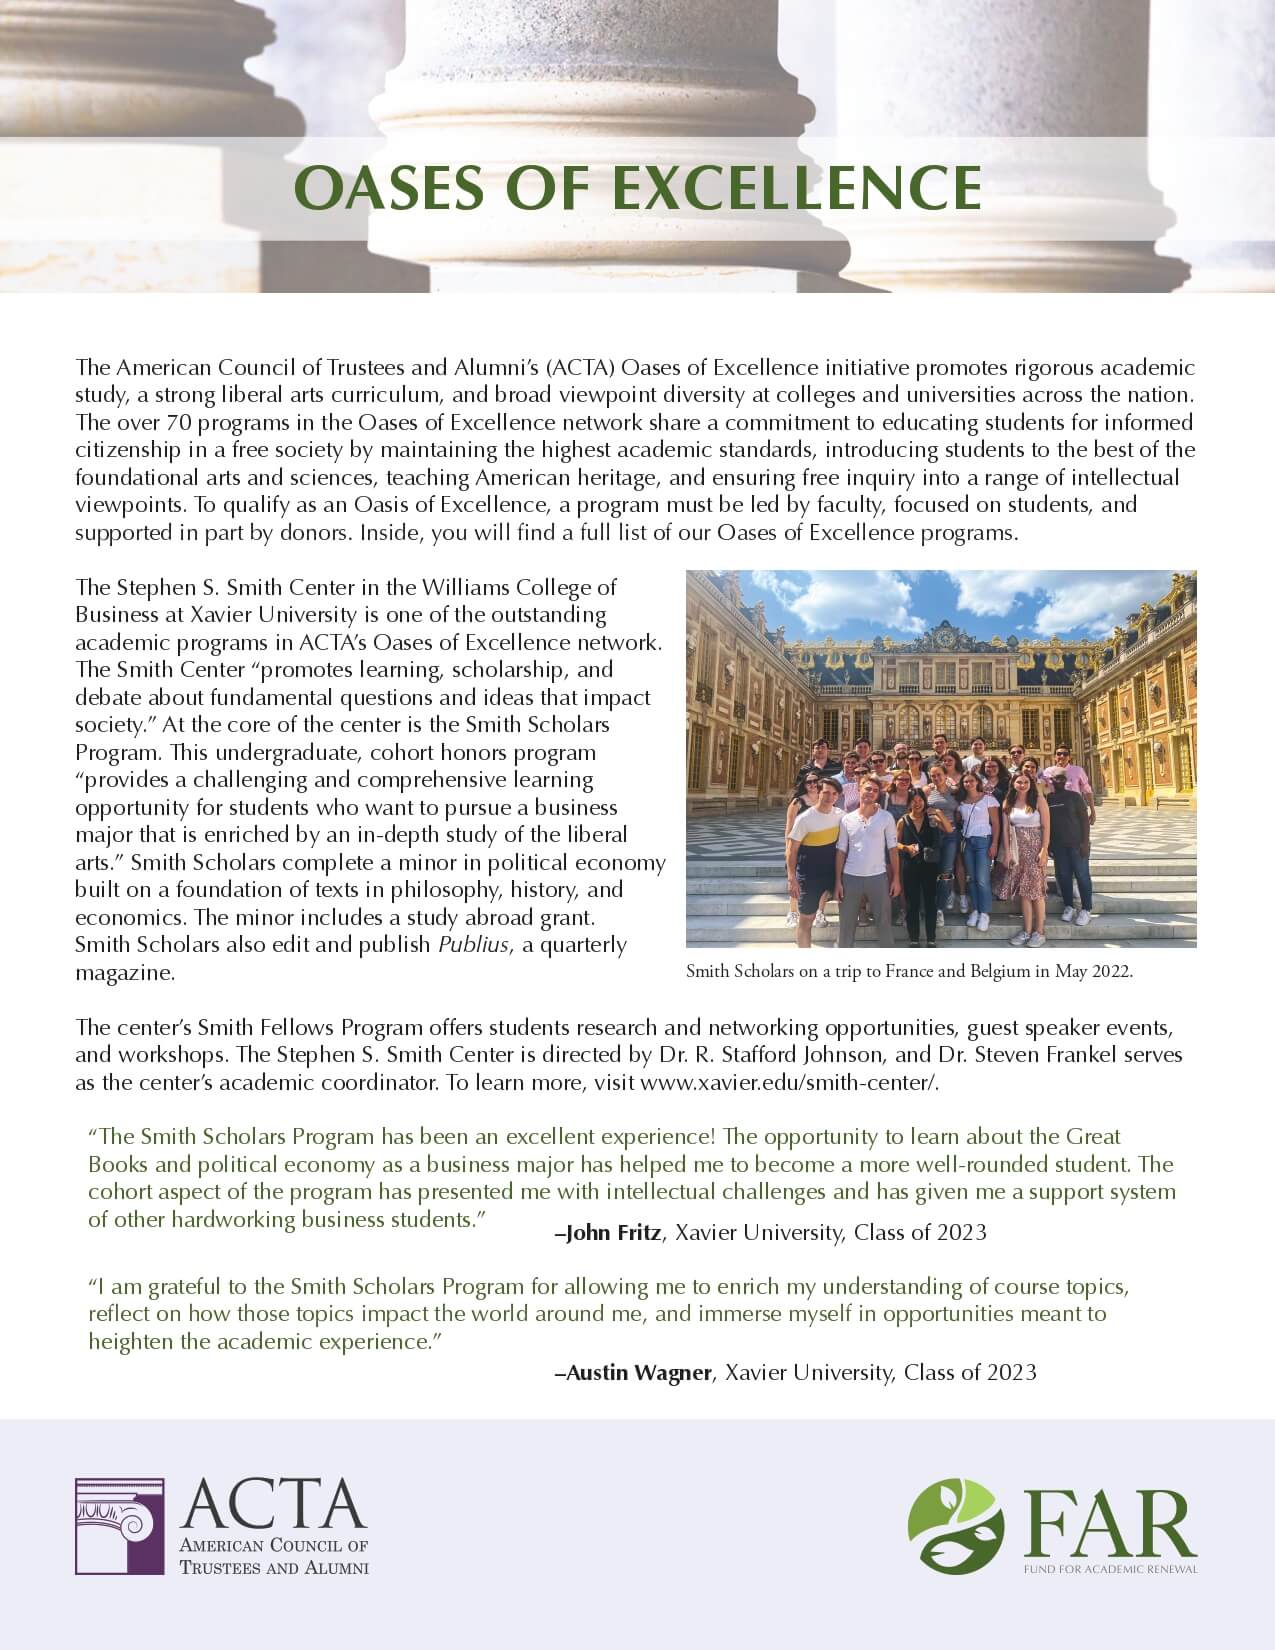 acta_oases_of_excellence_guide_page-0001-2024.jpg